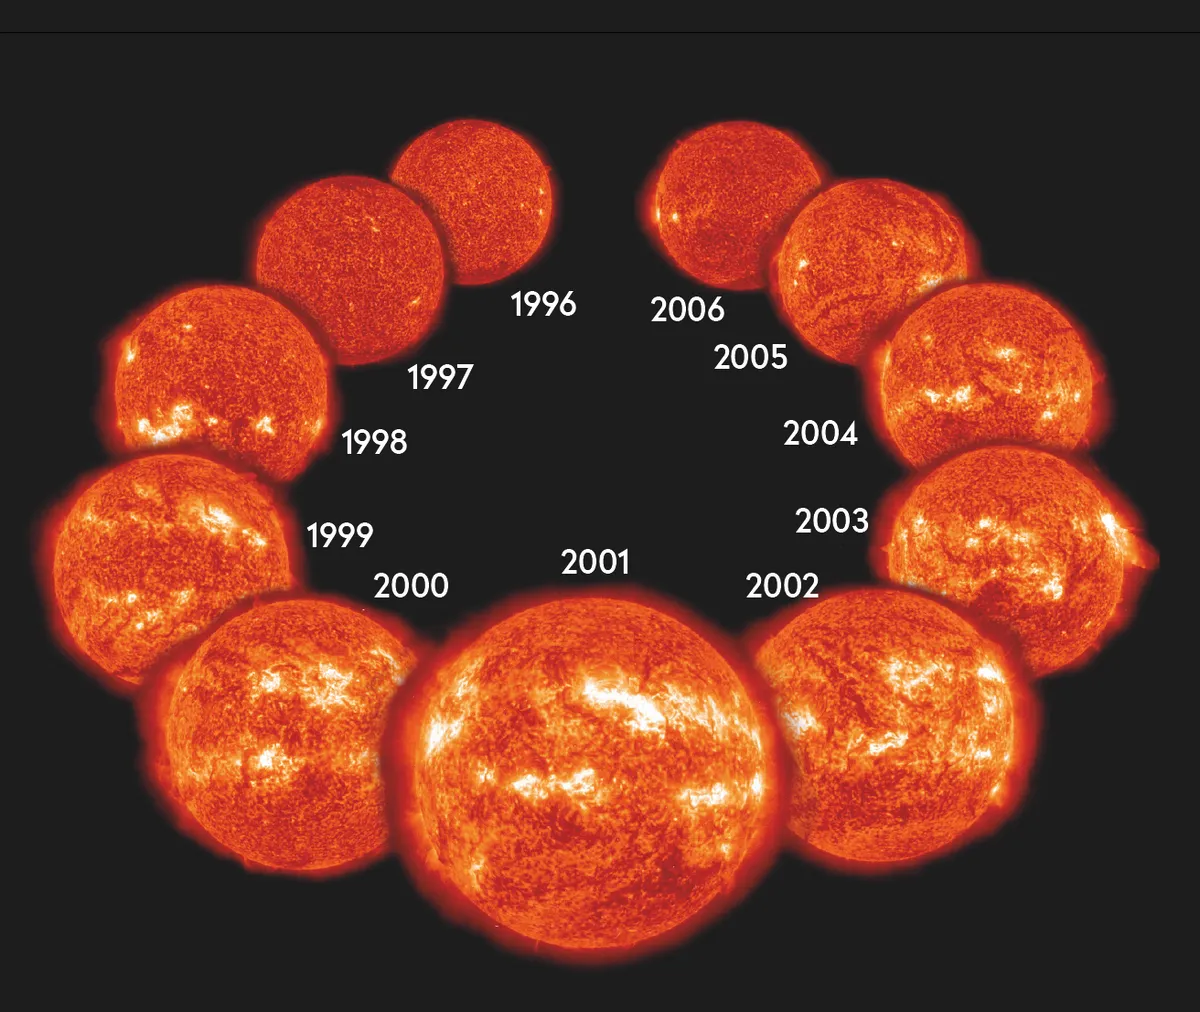 Solar cycle 23, captured in extreme ultraviolet light by NASA’s SOHO spacecraft, reveals maximum activity in 2001. Credit: SOHO (ESA & NASA)